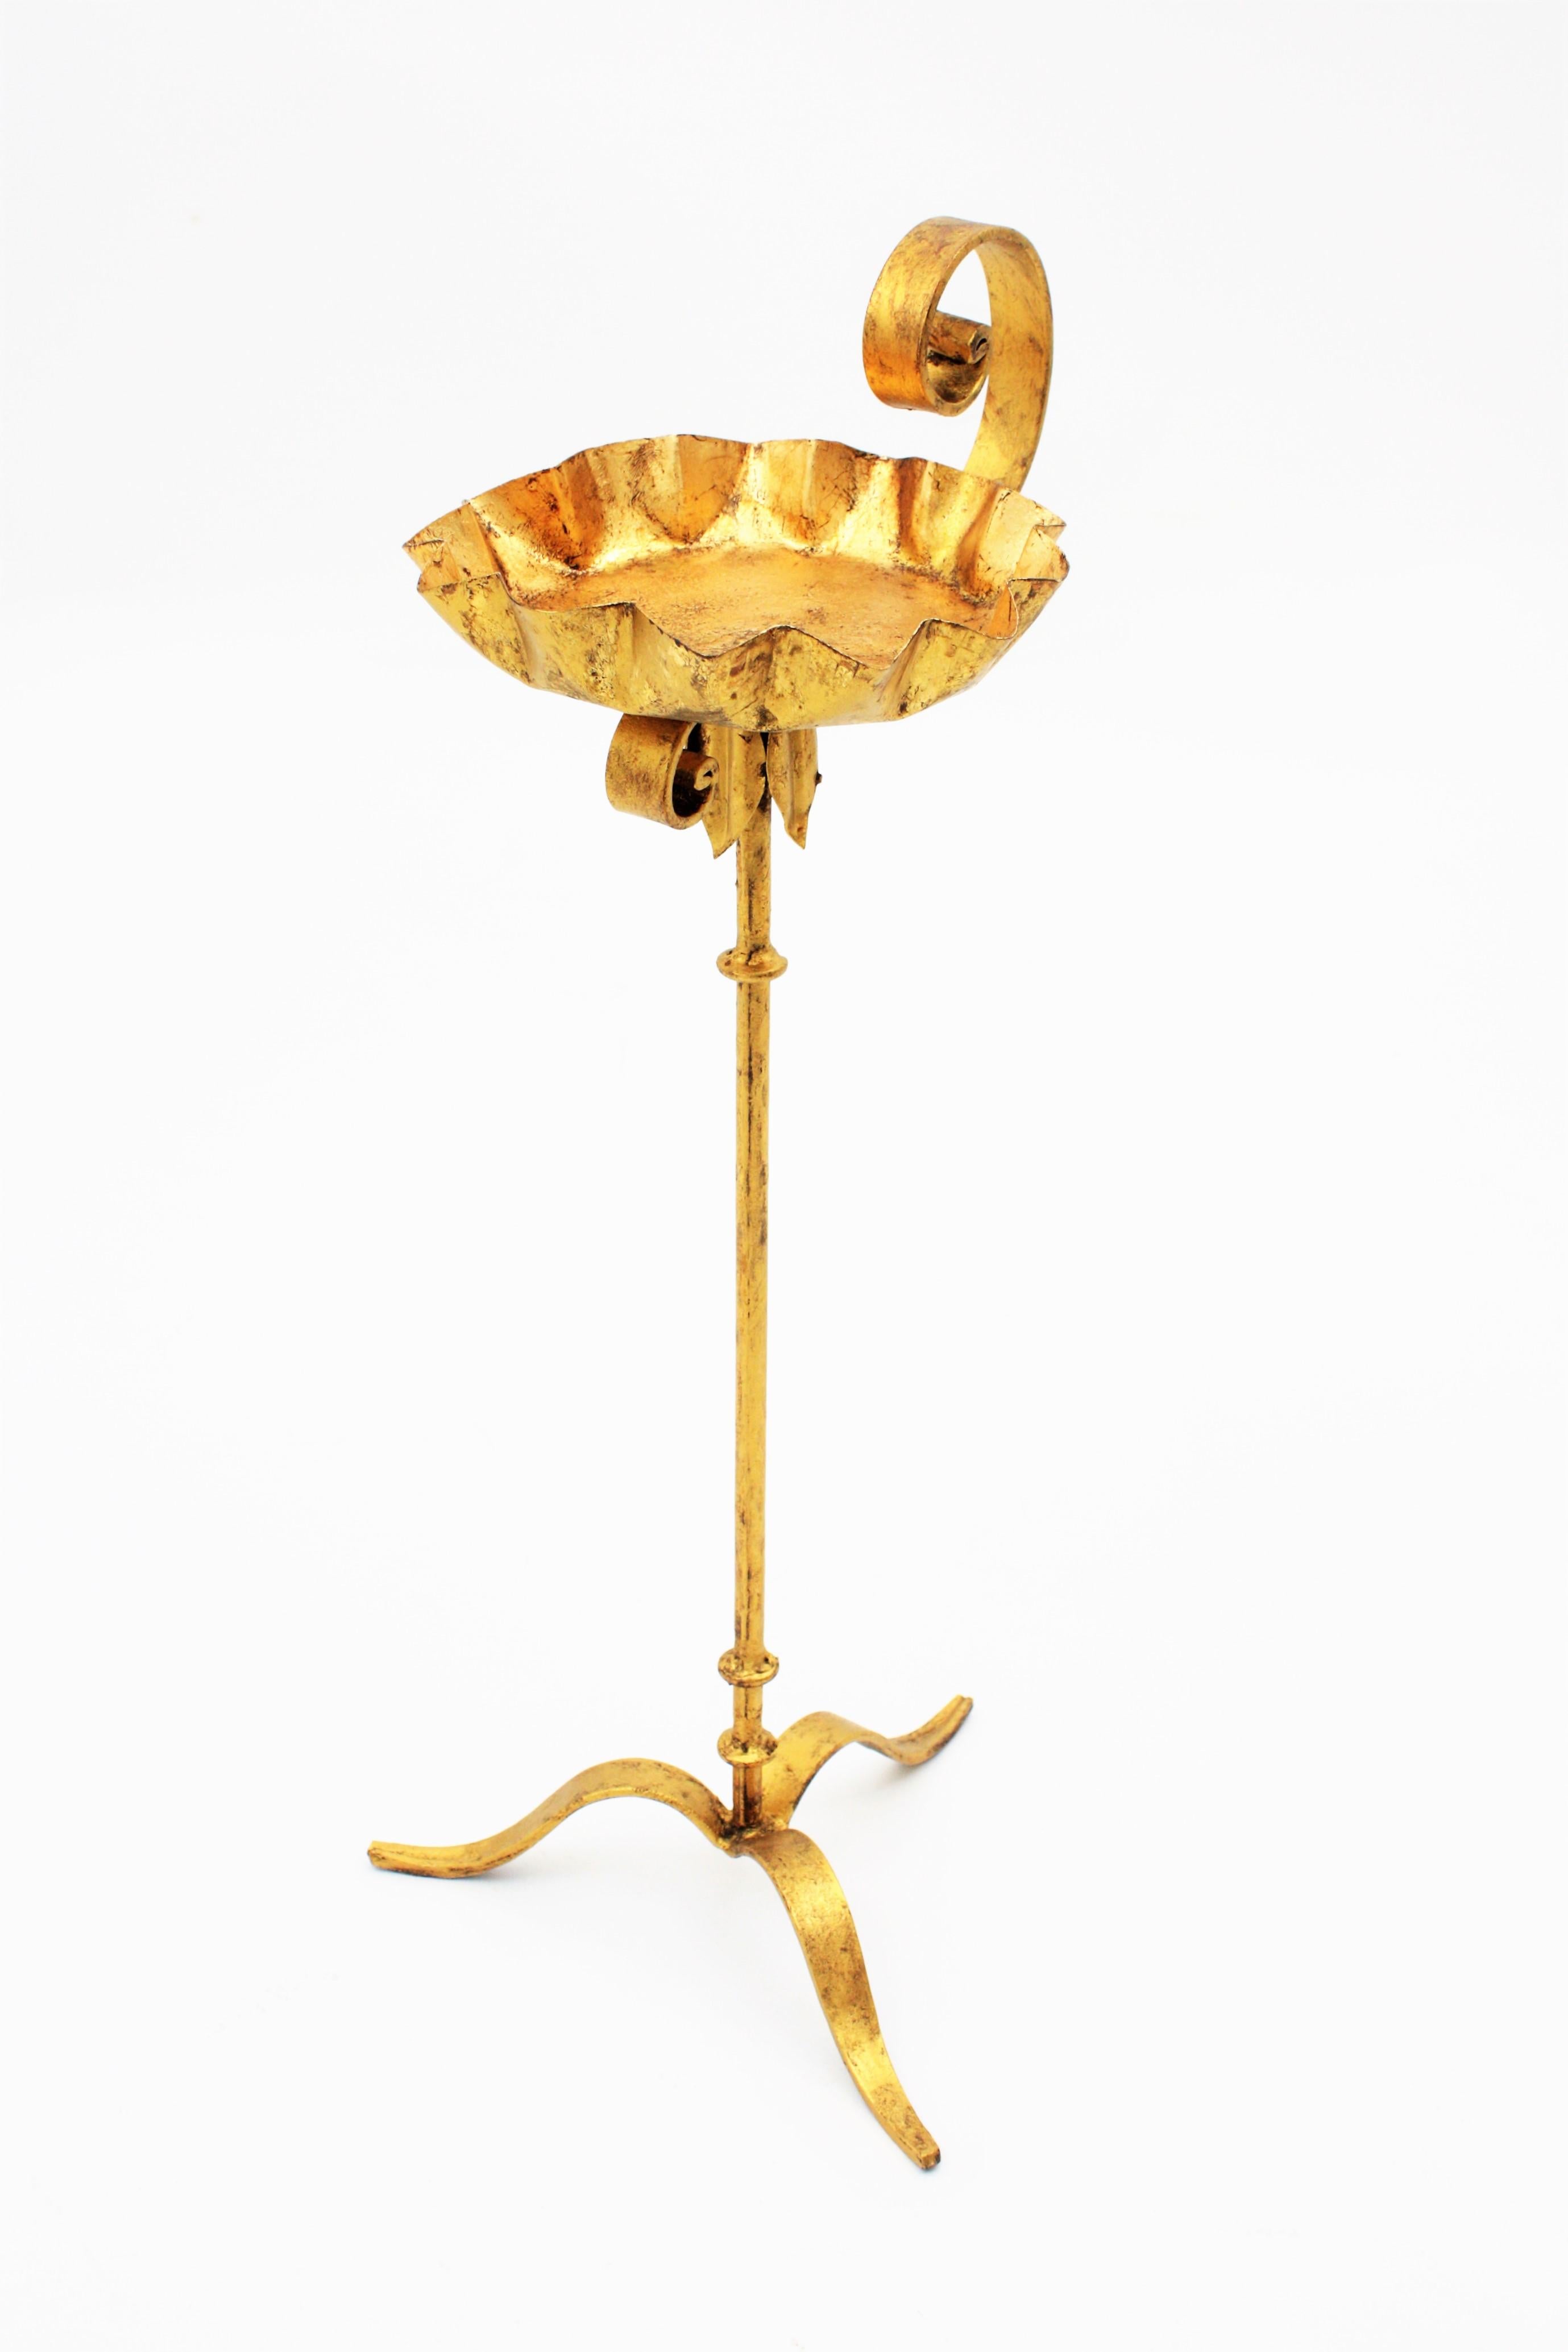 Wrought gilt iron floor ashtray, tripod stand or pedestal in Gothic style, 1930s
An stylish hand-hammered iron Gothic style standing ashtray with scroll detailing and wavy edged top. It has a nice patina with gold leaf finish.
This piece is in